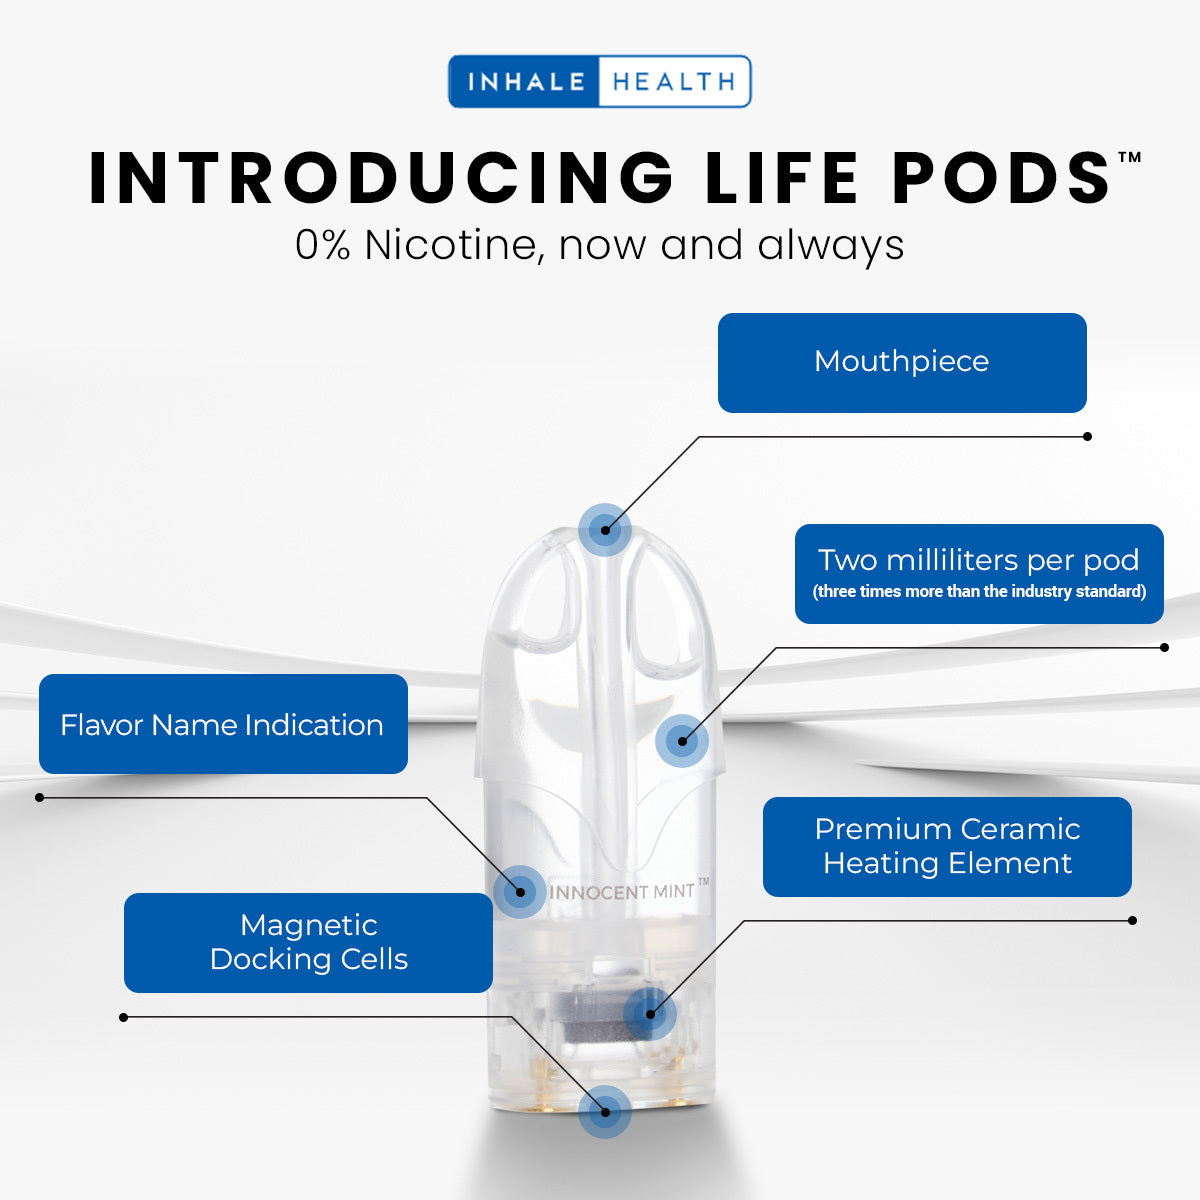 Life Pods™ Never Going Bacco